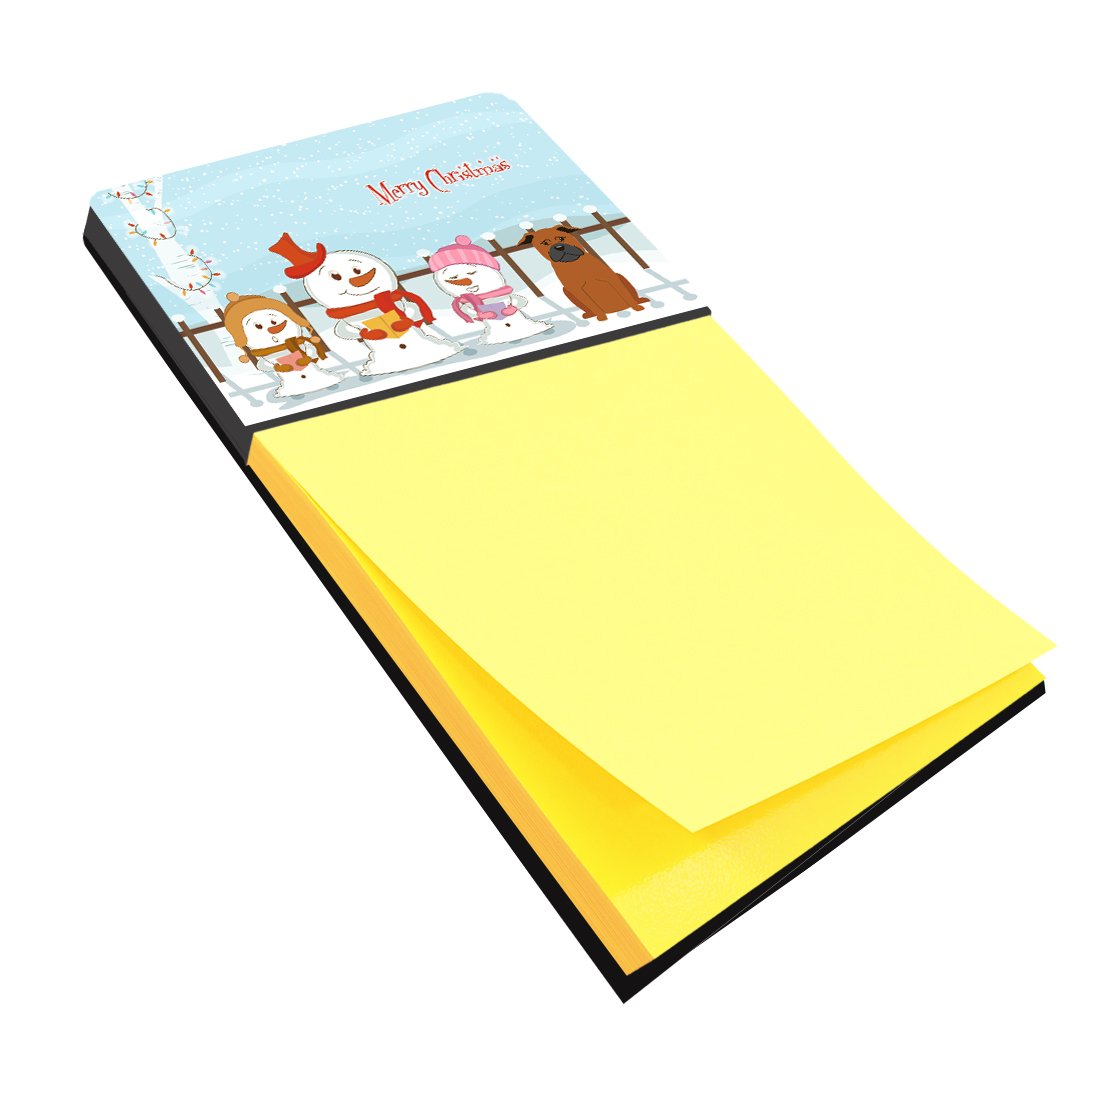 Merry Christmas Carolers Chinese Chongqing Dog Sticky Note Holder BB2442SN by Caroline's Treasures